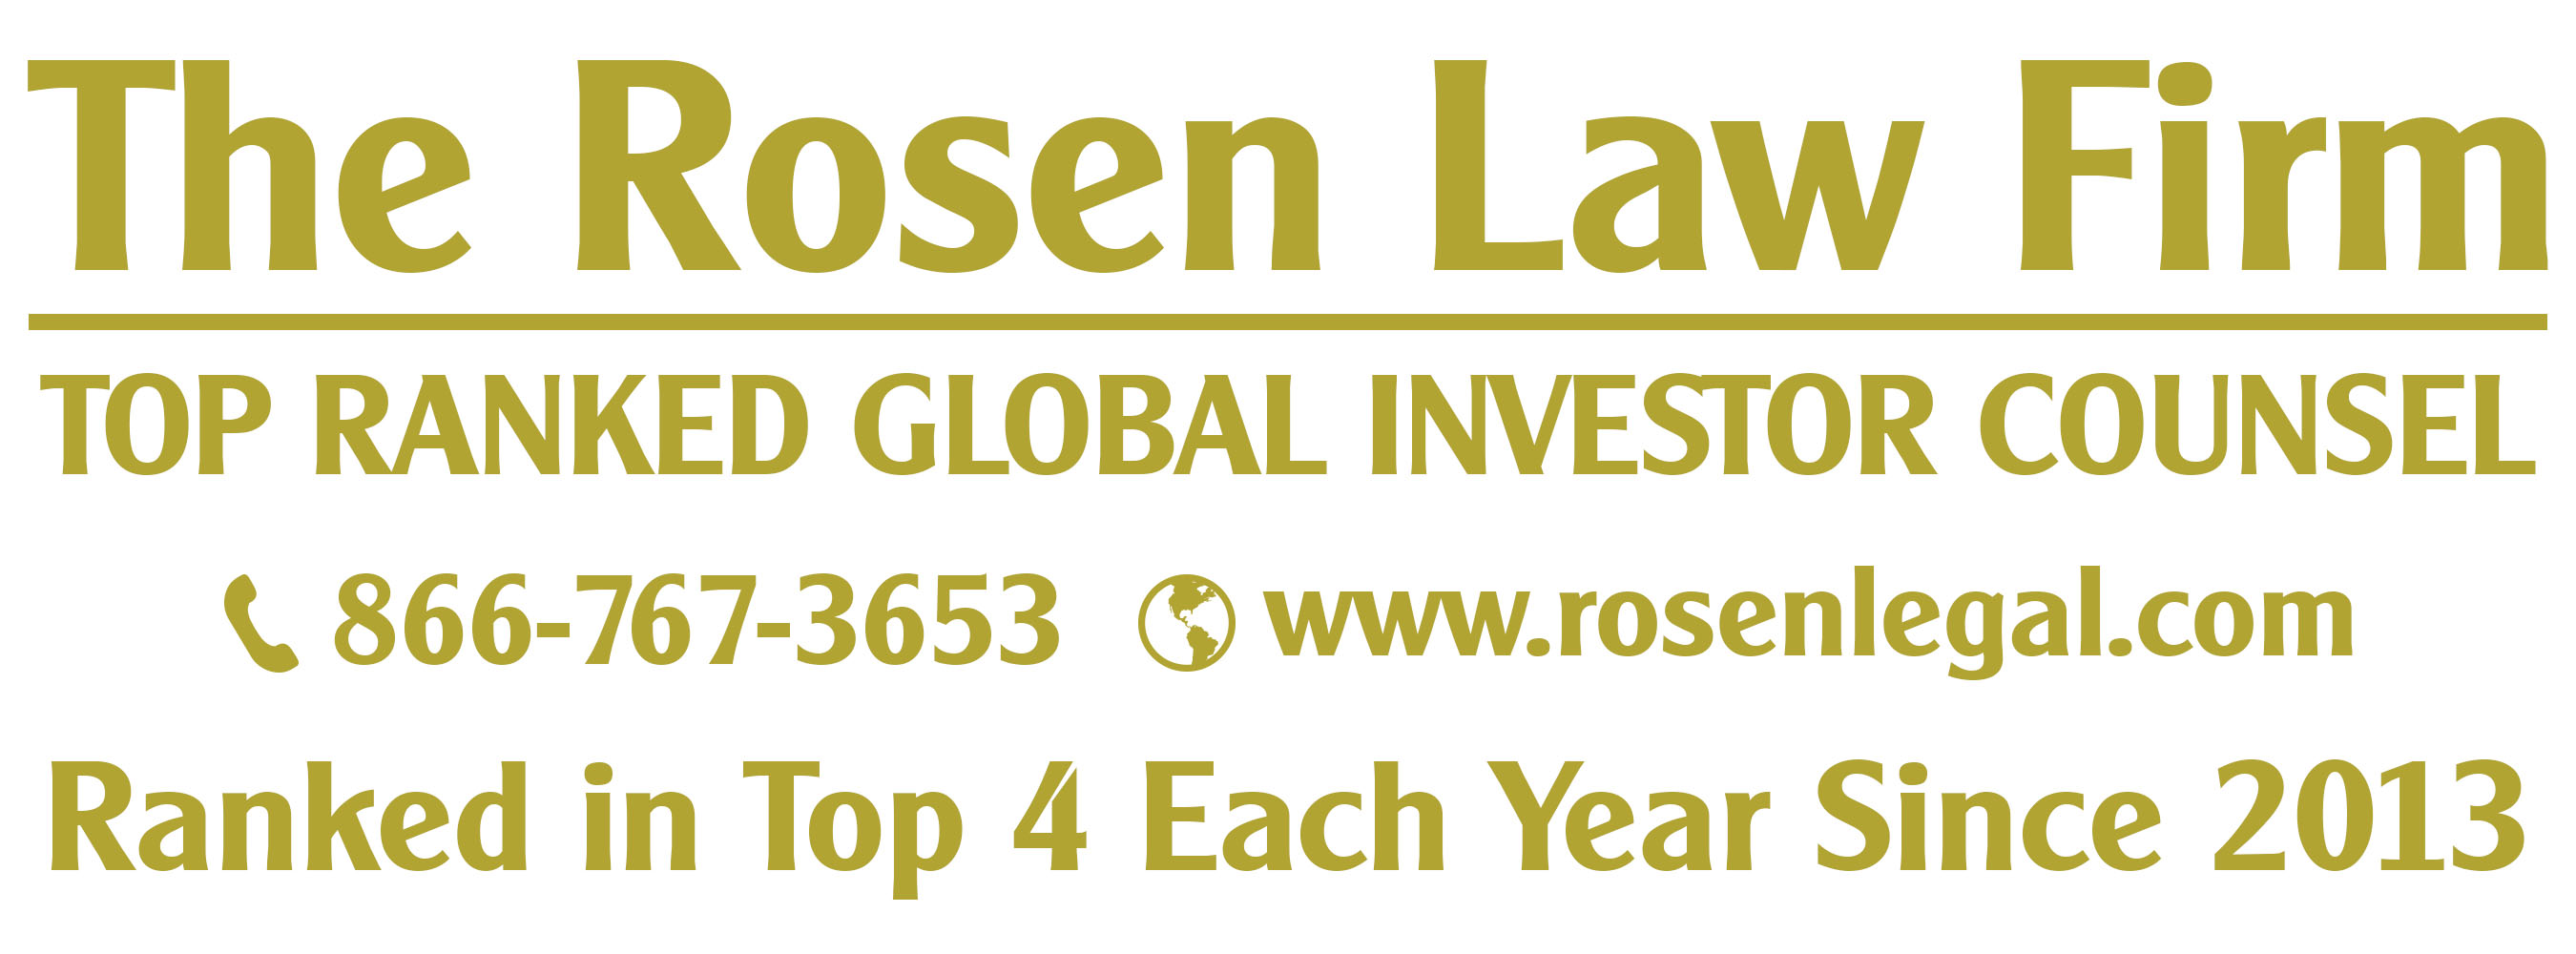 Rosen Law Firm PA, Wednesday, January 18, 2023, Press release picture